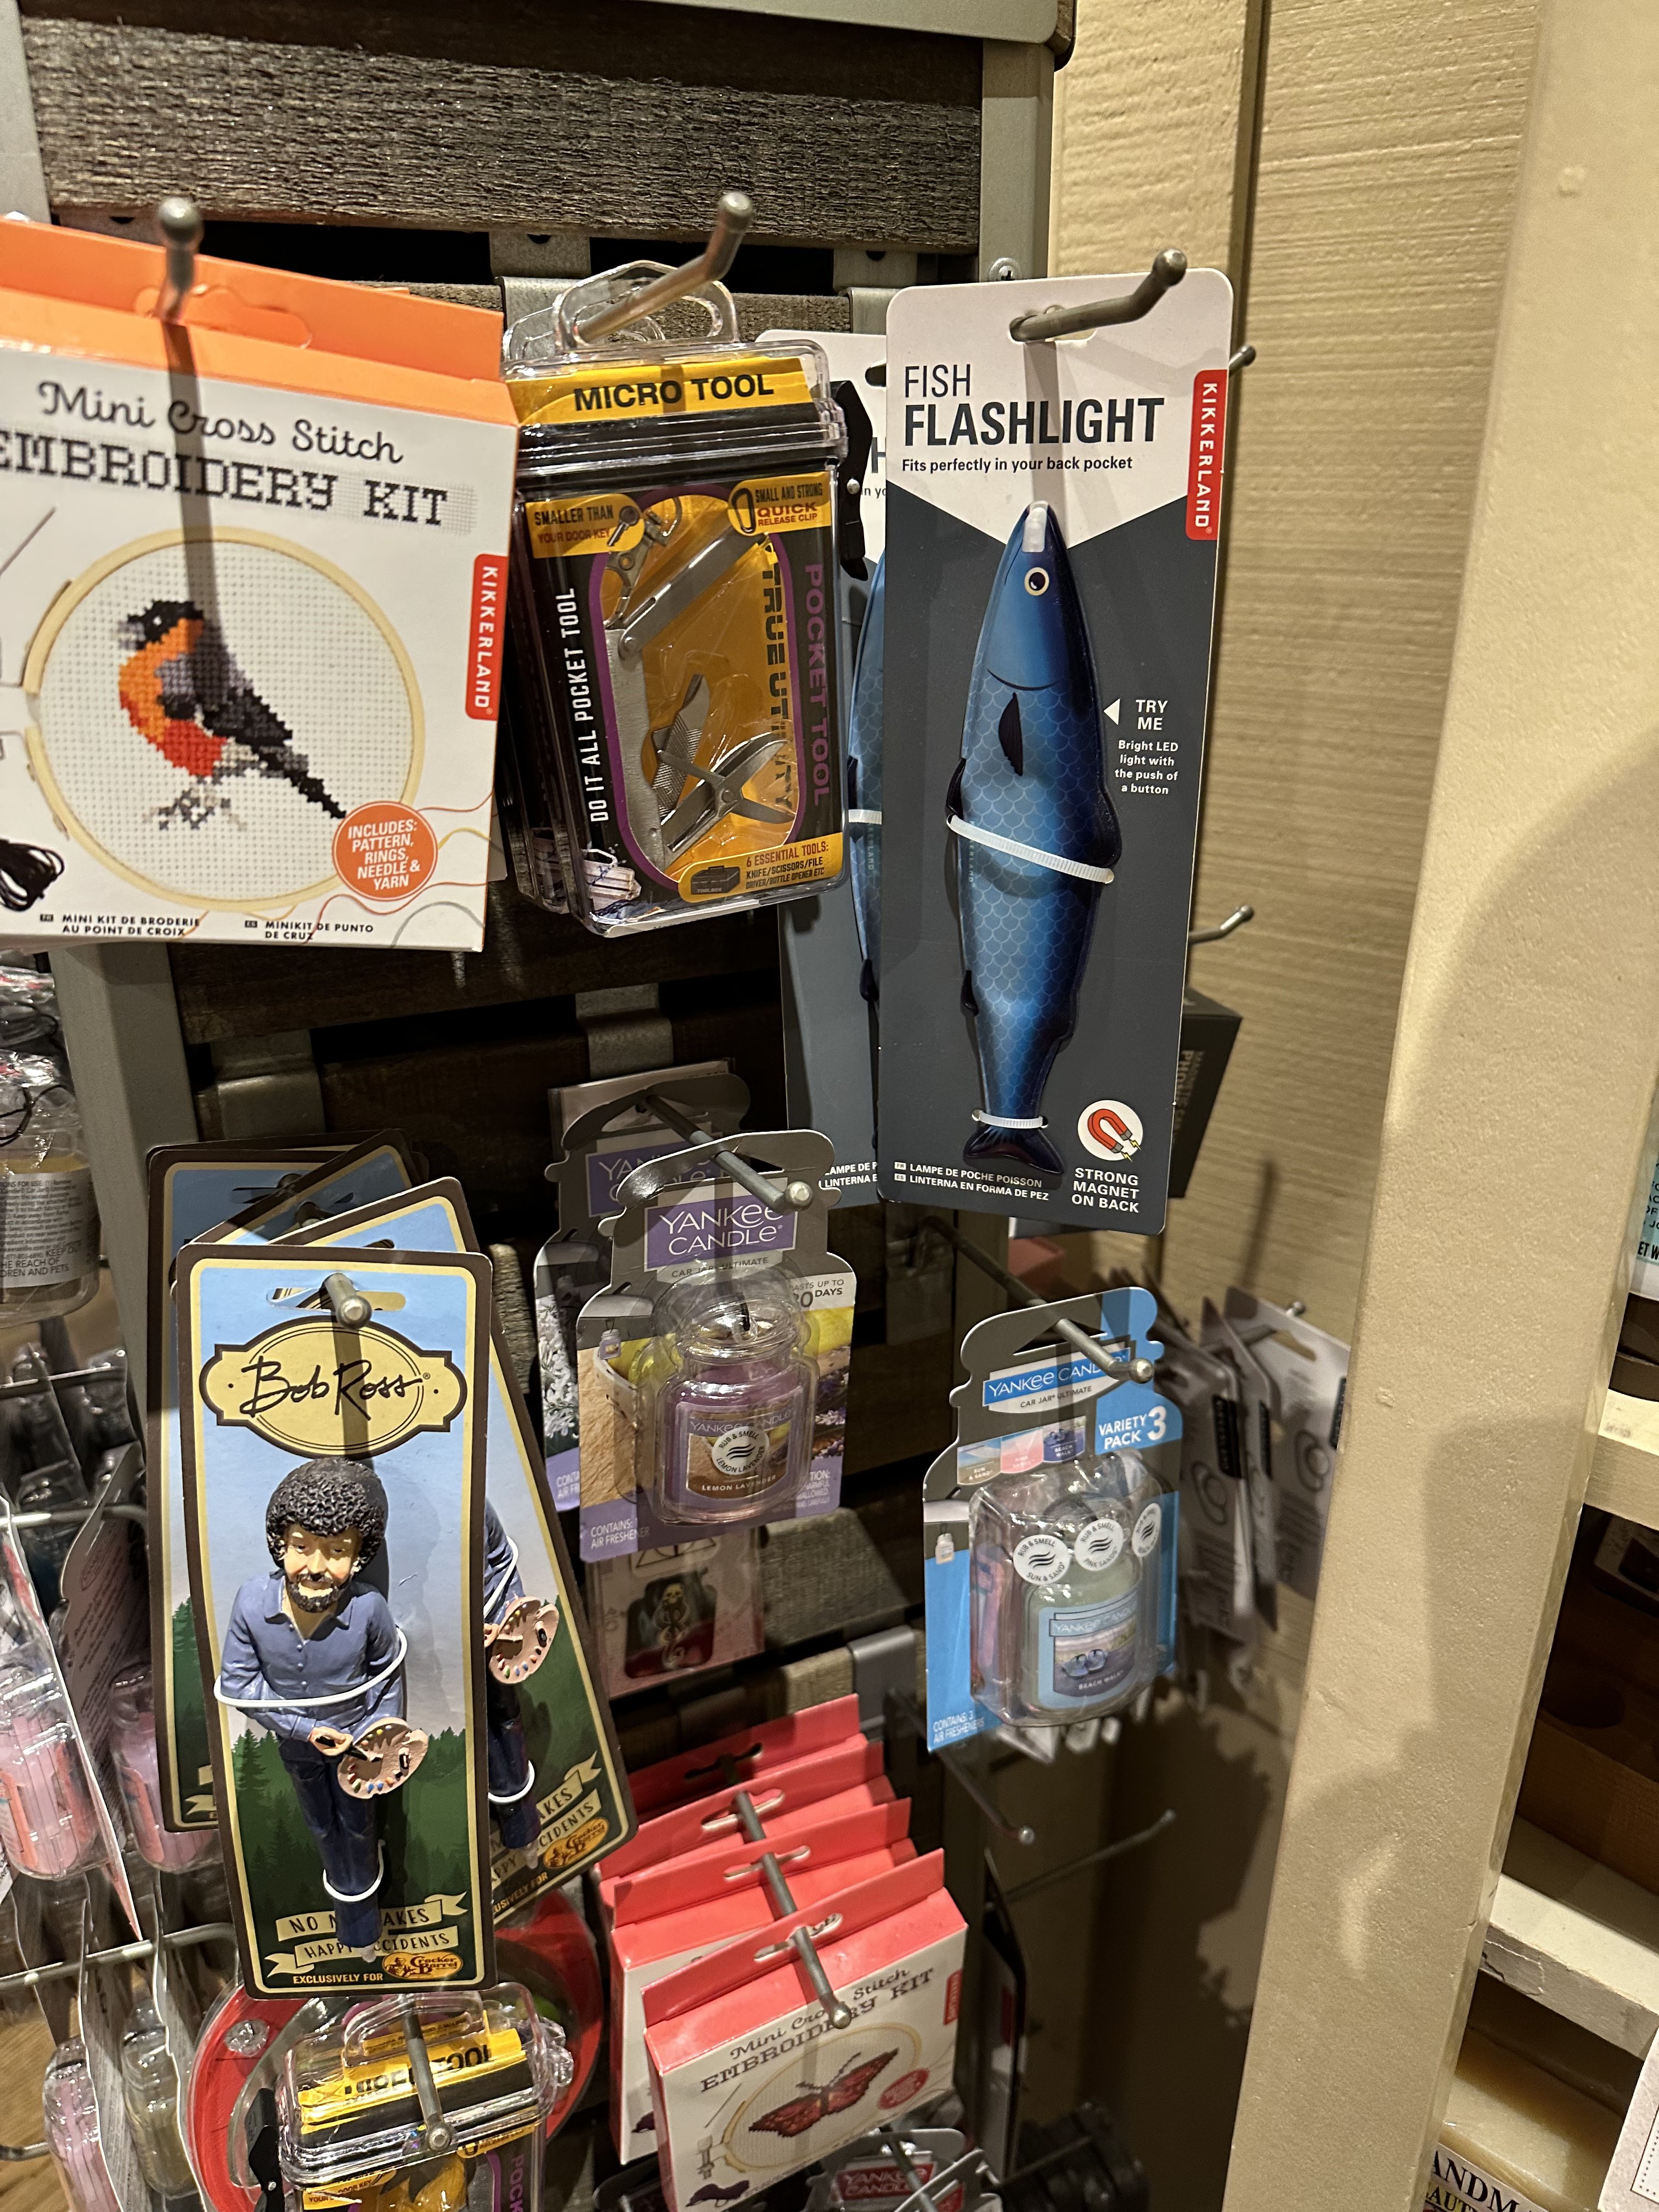 Ninji (has moved) on X: The Cracker Barrel gift shop is a fever